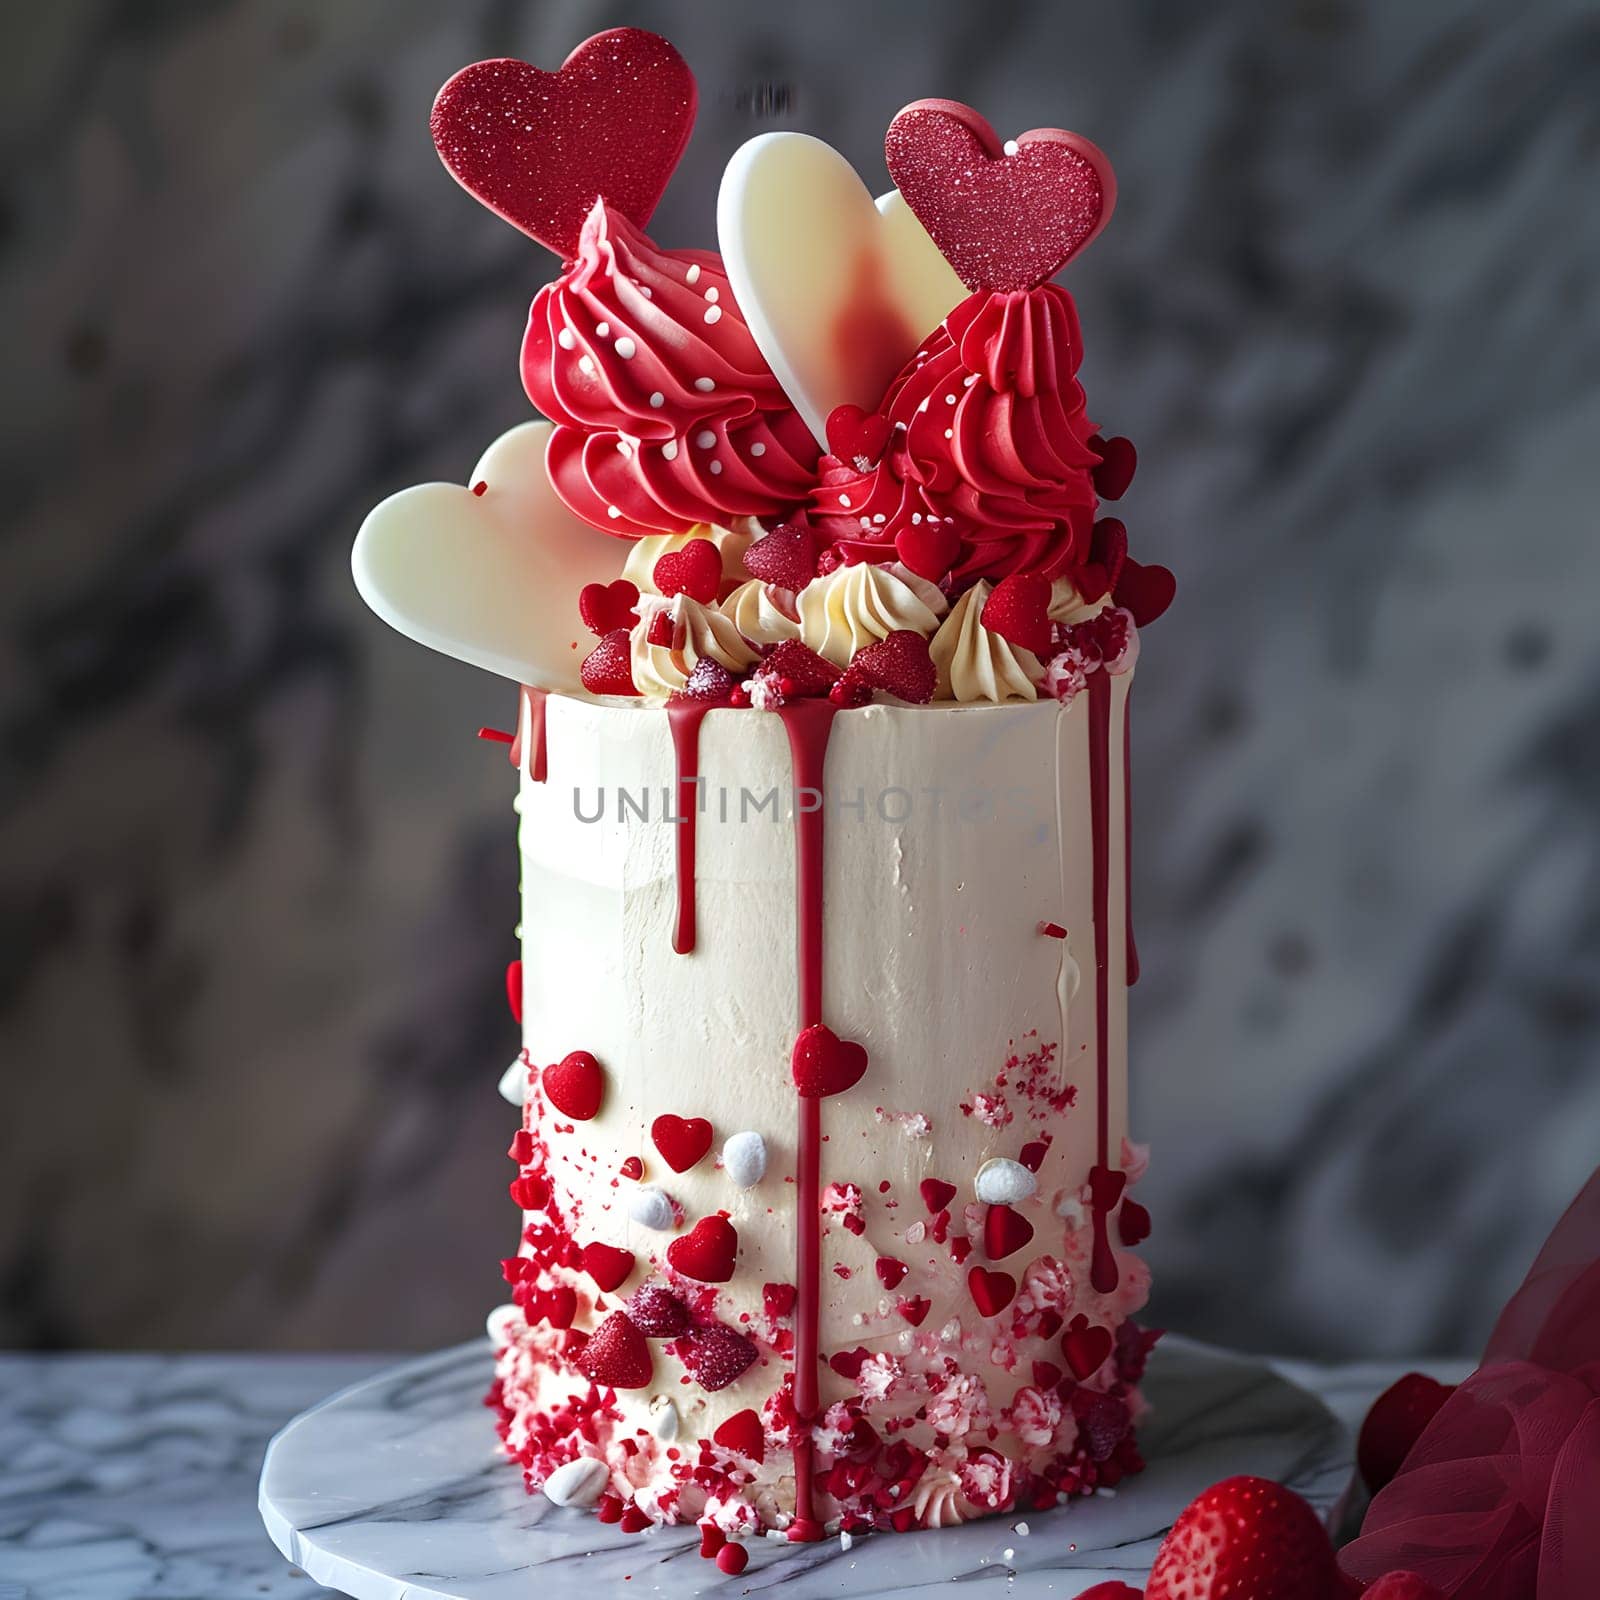 White sugar cake with red frosting, heart decorations, and sweet petals on top by Nadtochiy